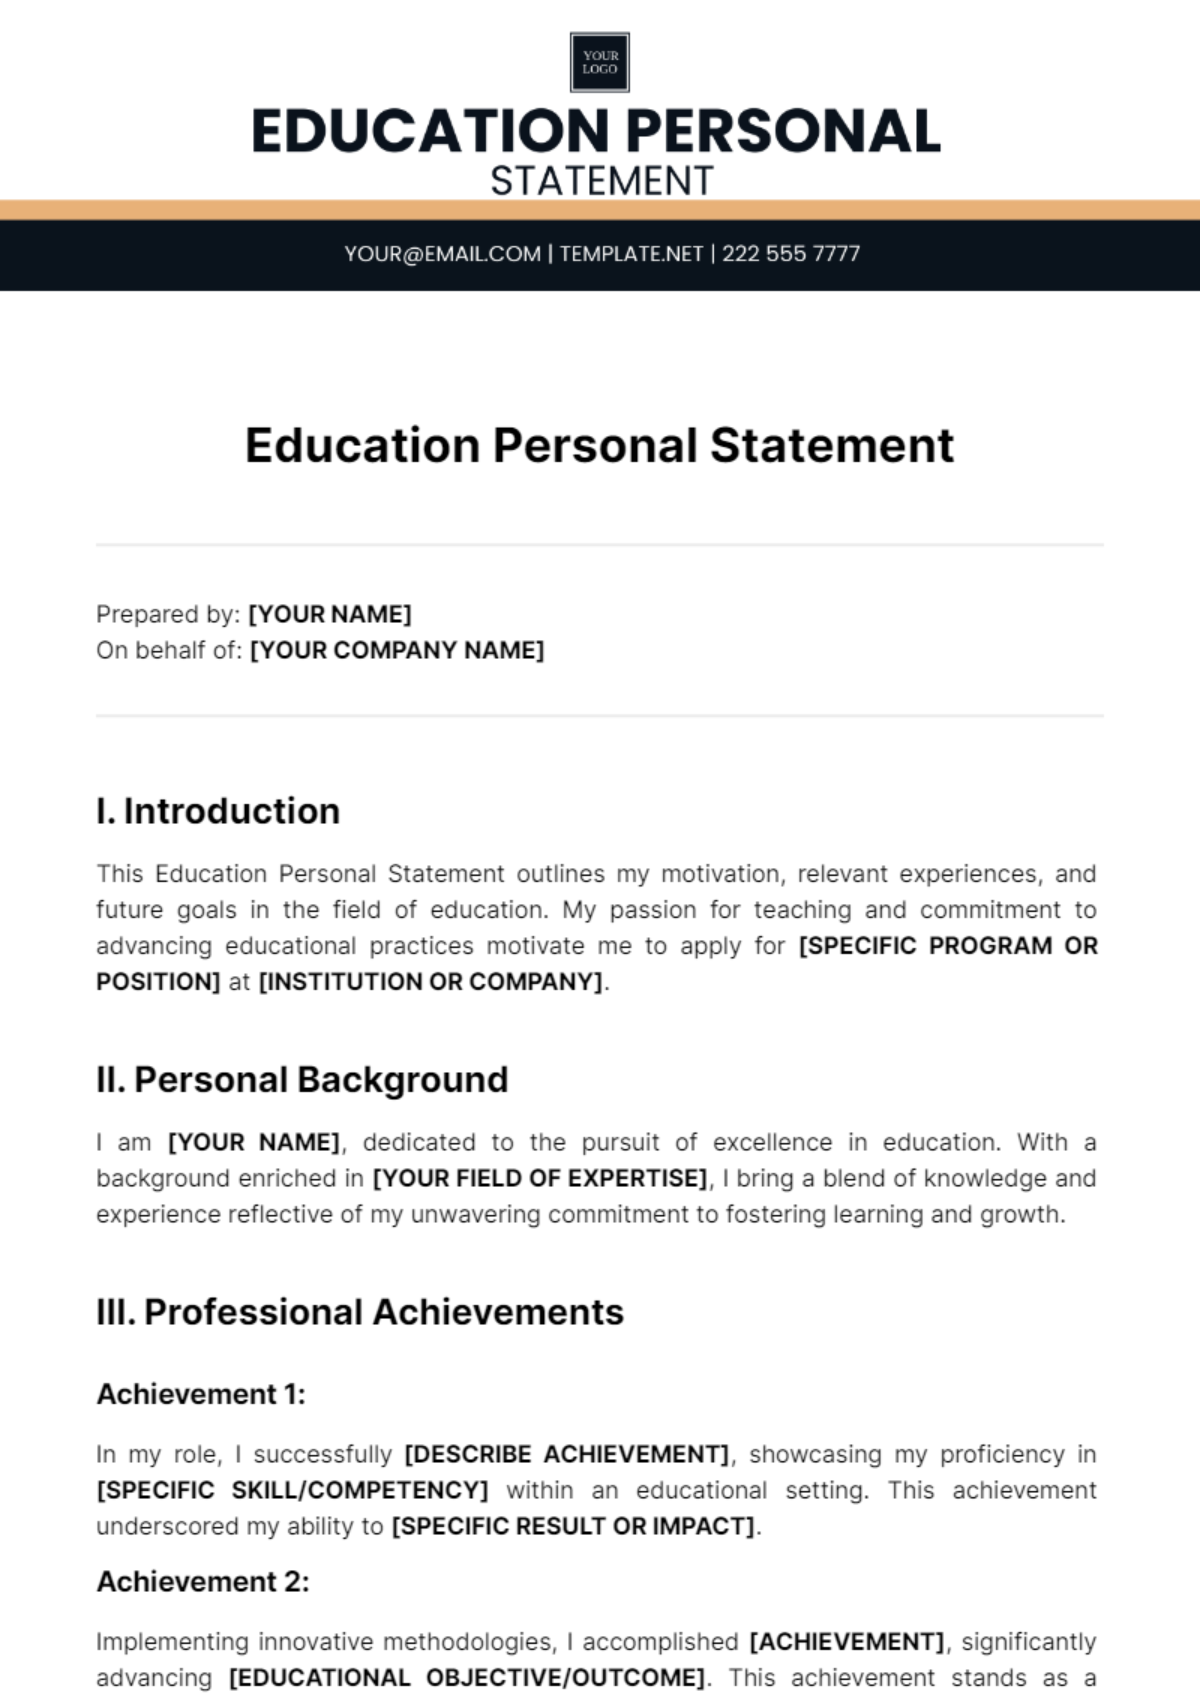 Education Personal Statement Template